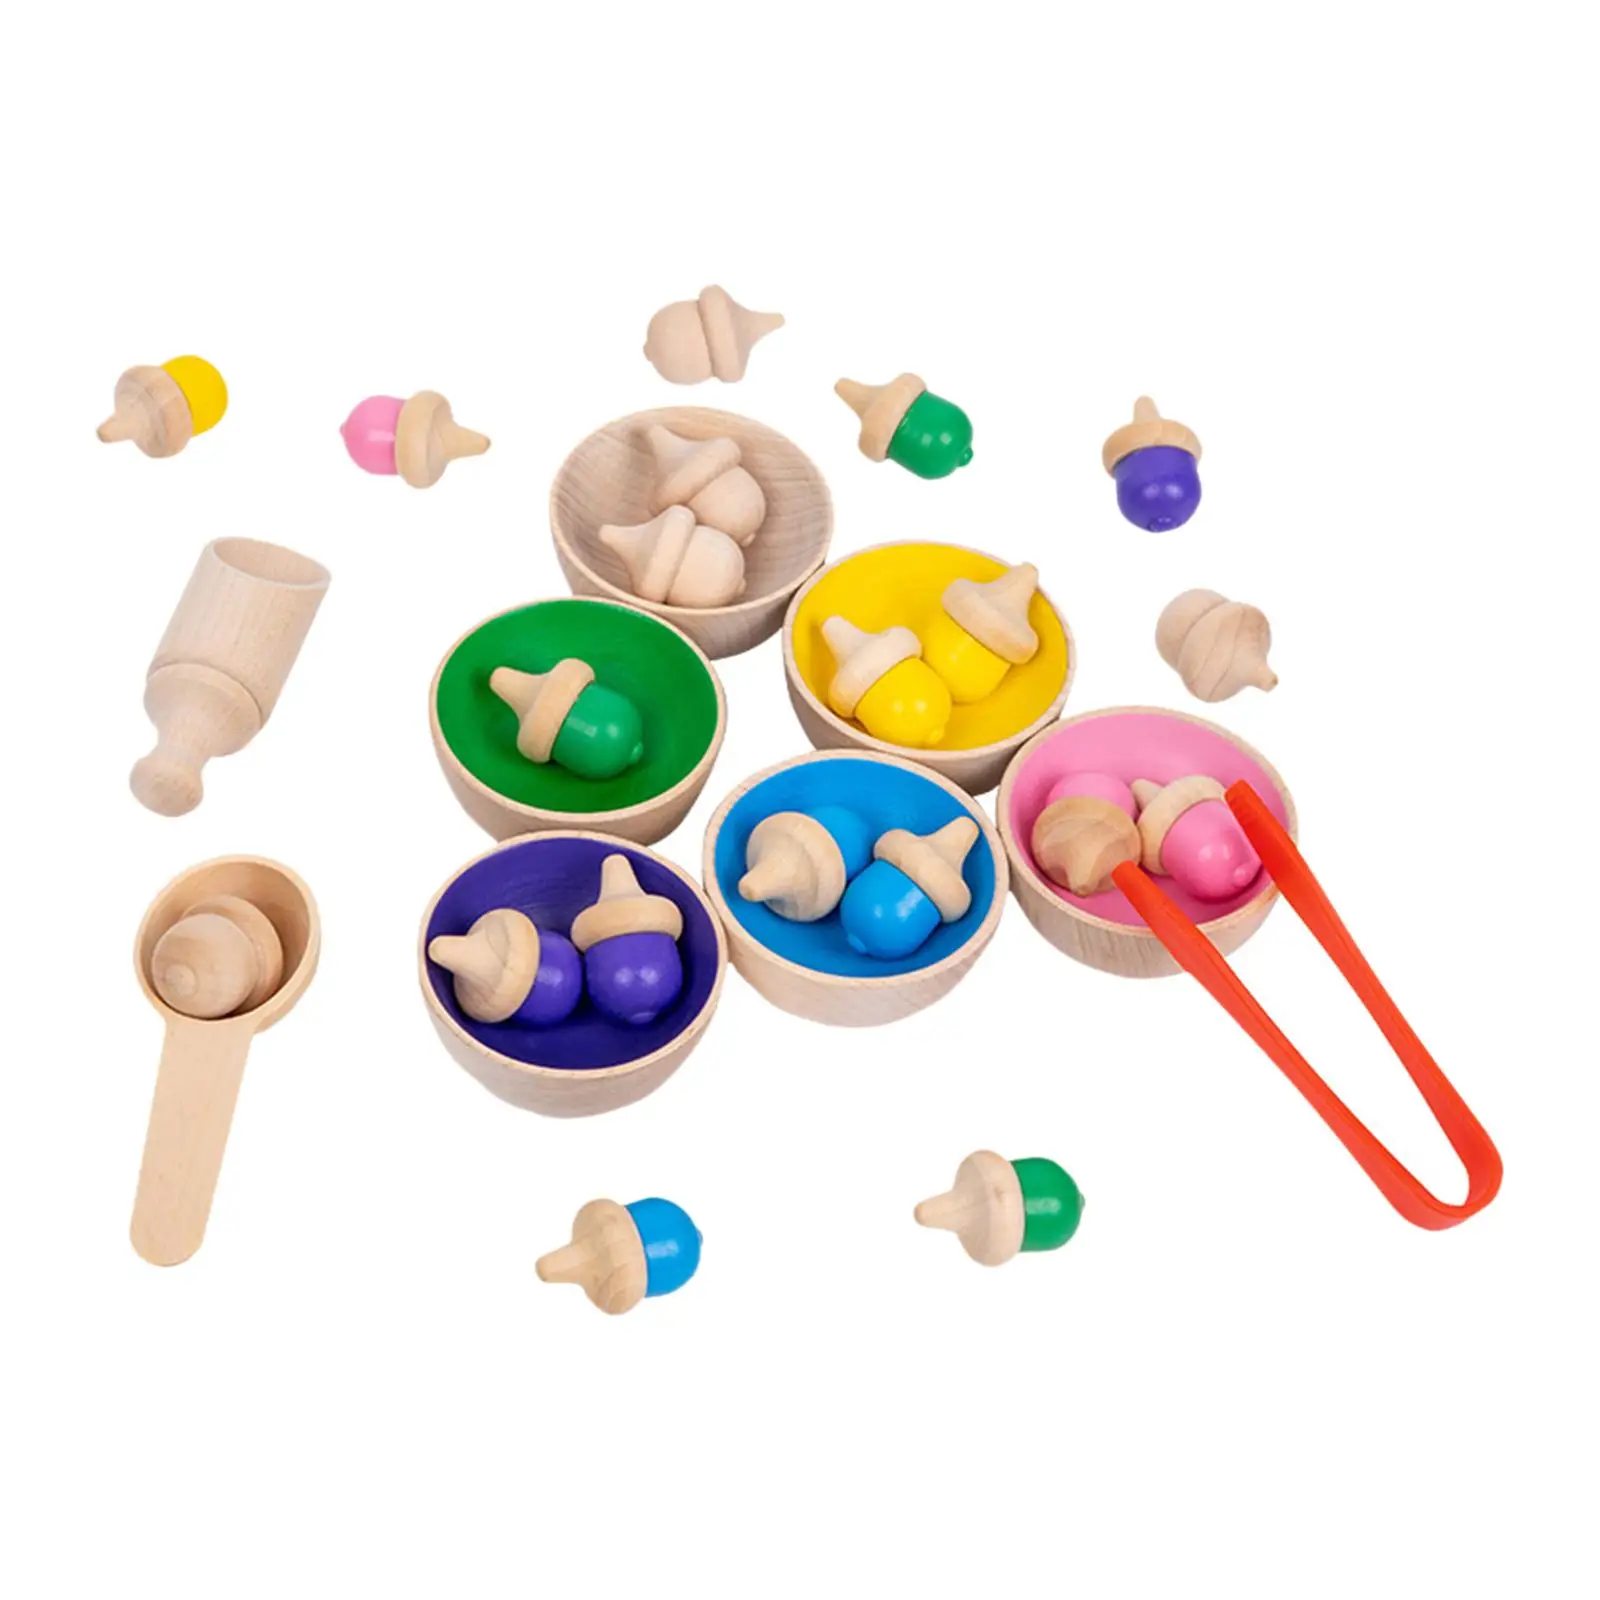 Wooden Rainbow Balls in Cups Montessori Toy Training Logical Thinking for Girls Boys